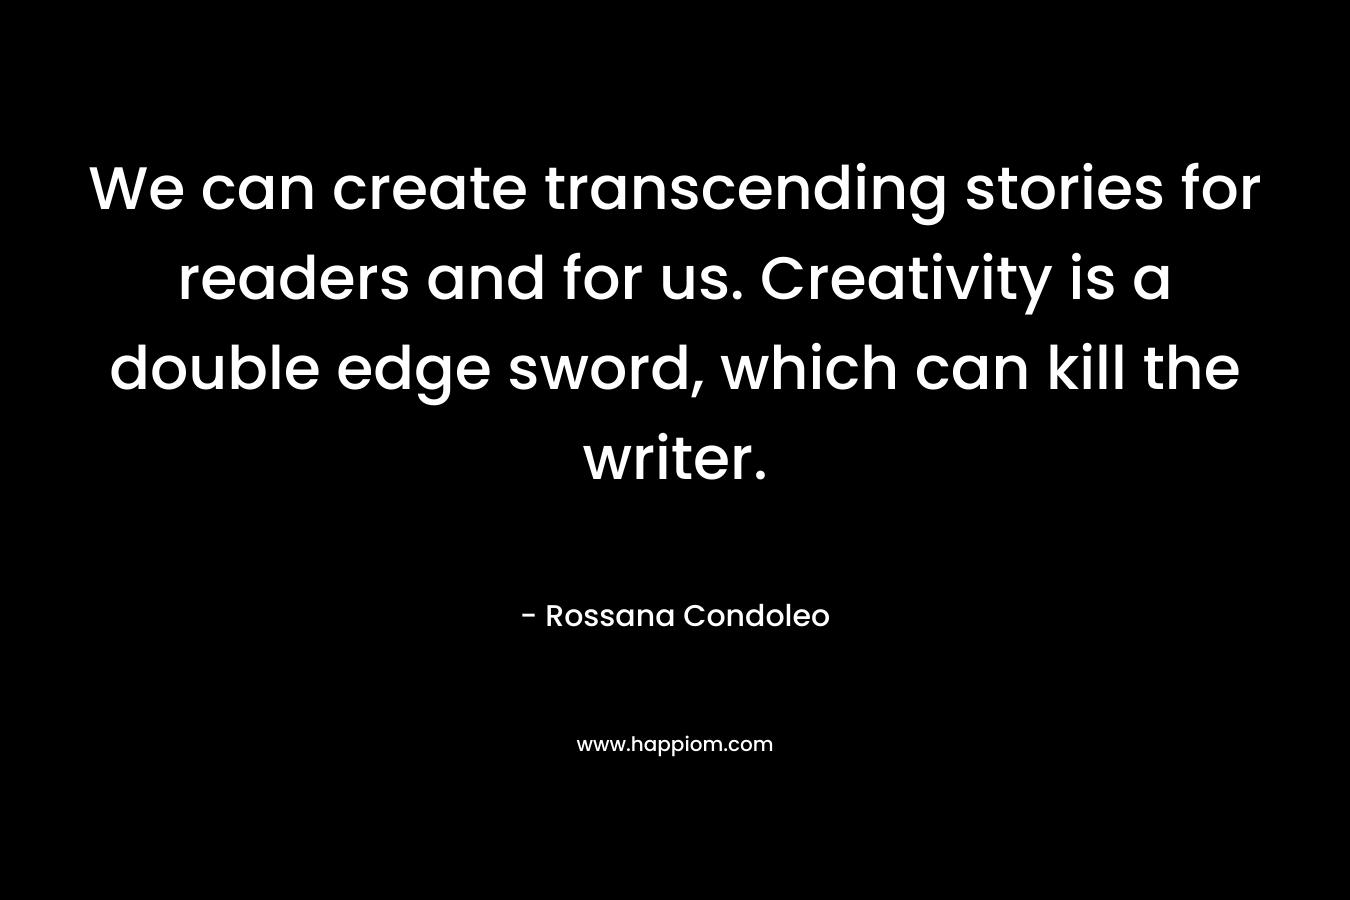 We can create transcending stories for readers and for us. Creativity is a double edge sword, which can kill the writer. – Rossana Condoleo